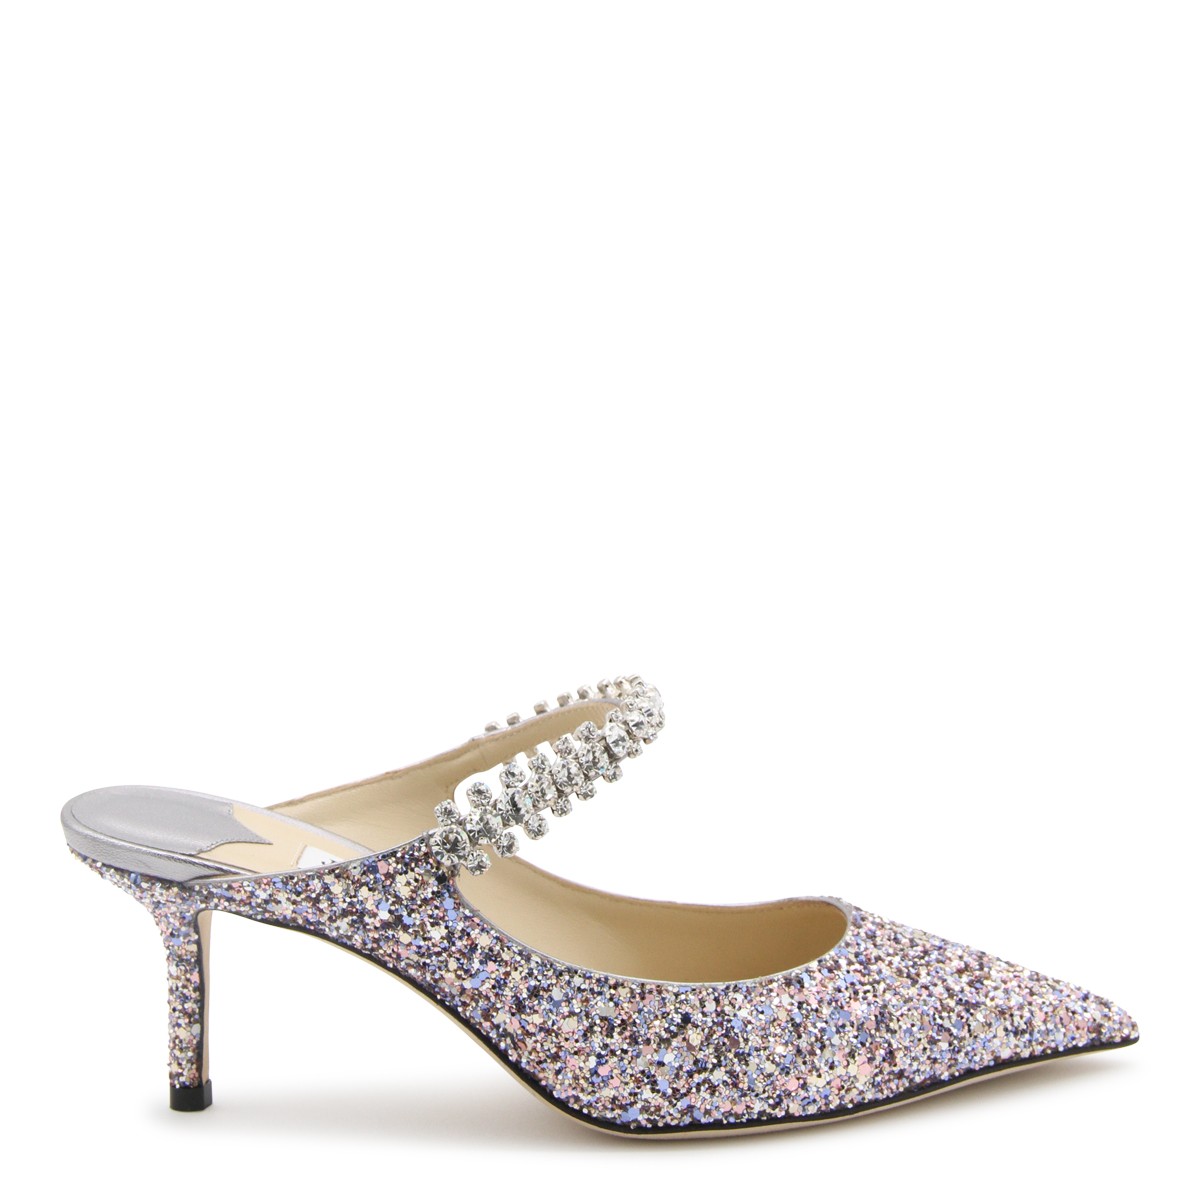 SPRINKLE MIX LEATHER BING PUMPS